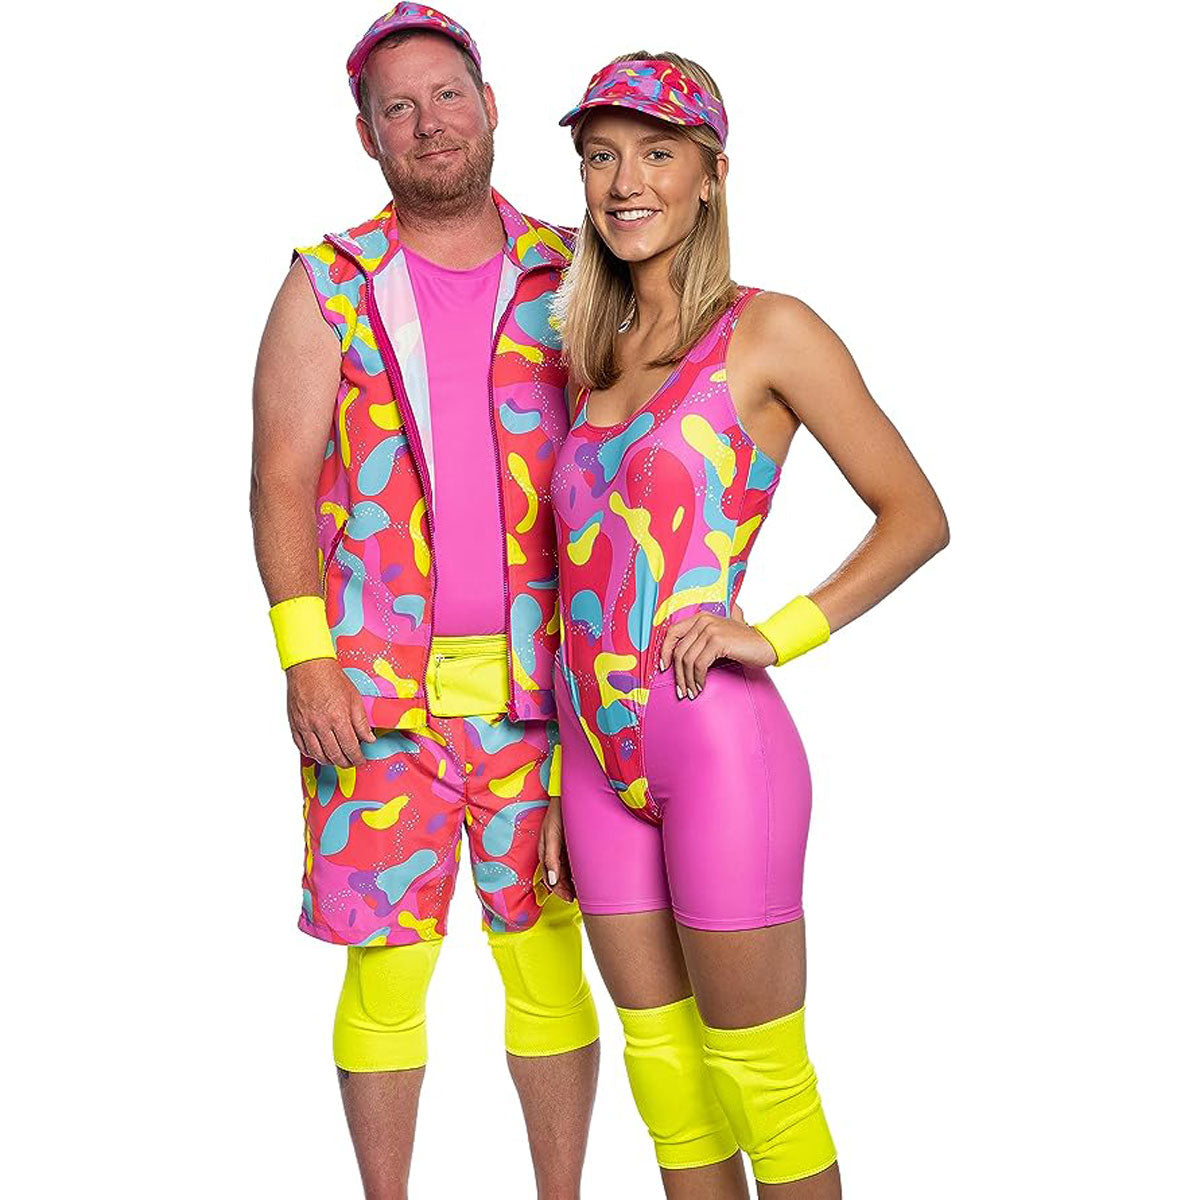 Barbie & Ken Workout Outfit Costume Full Couple